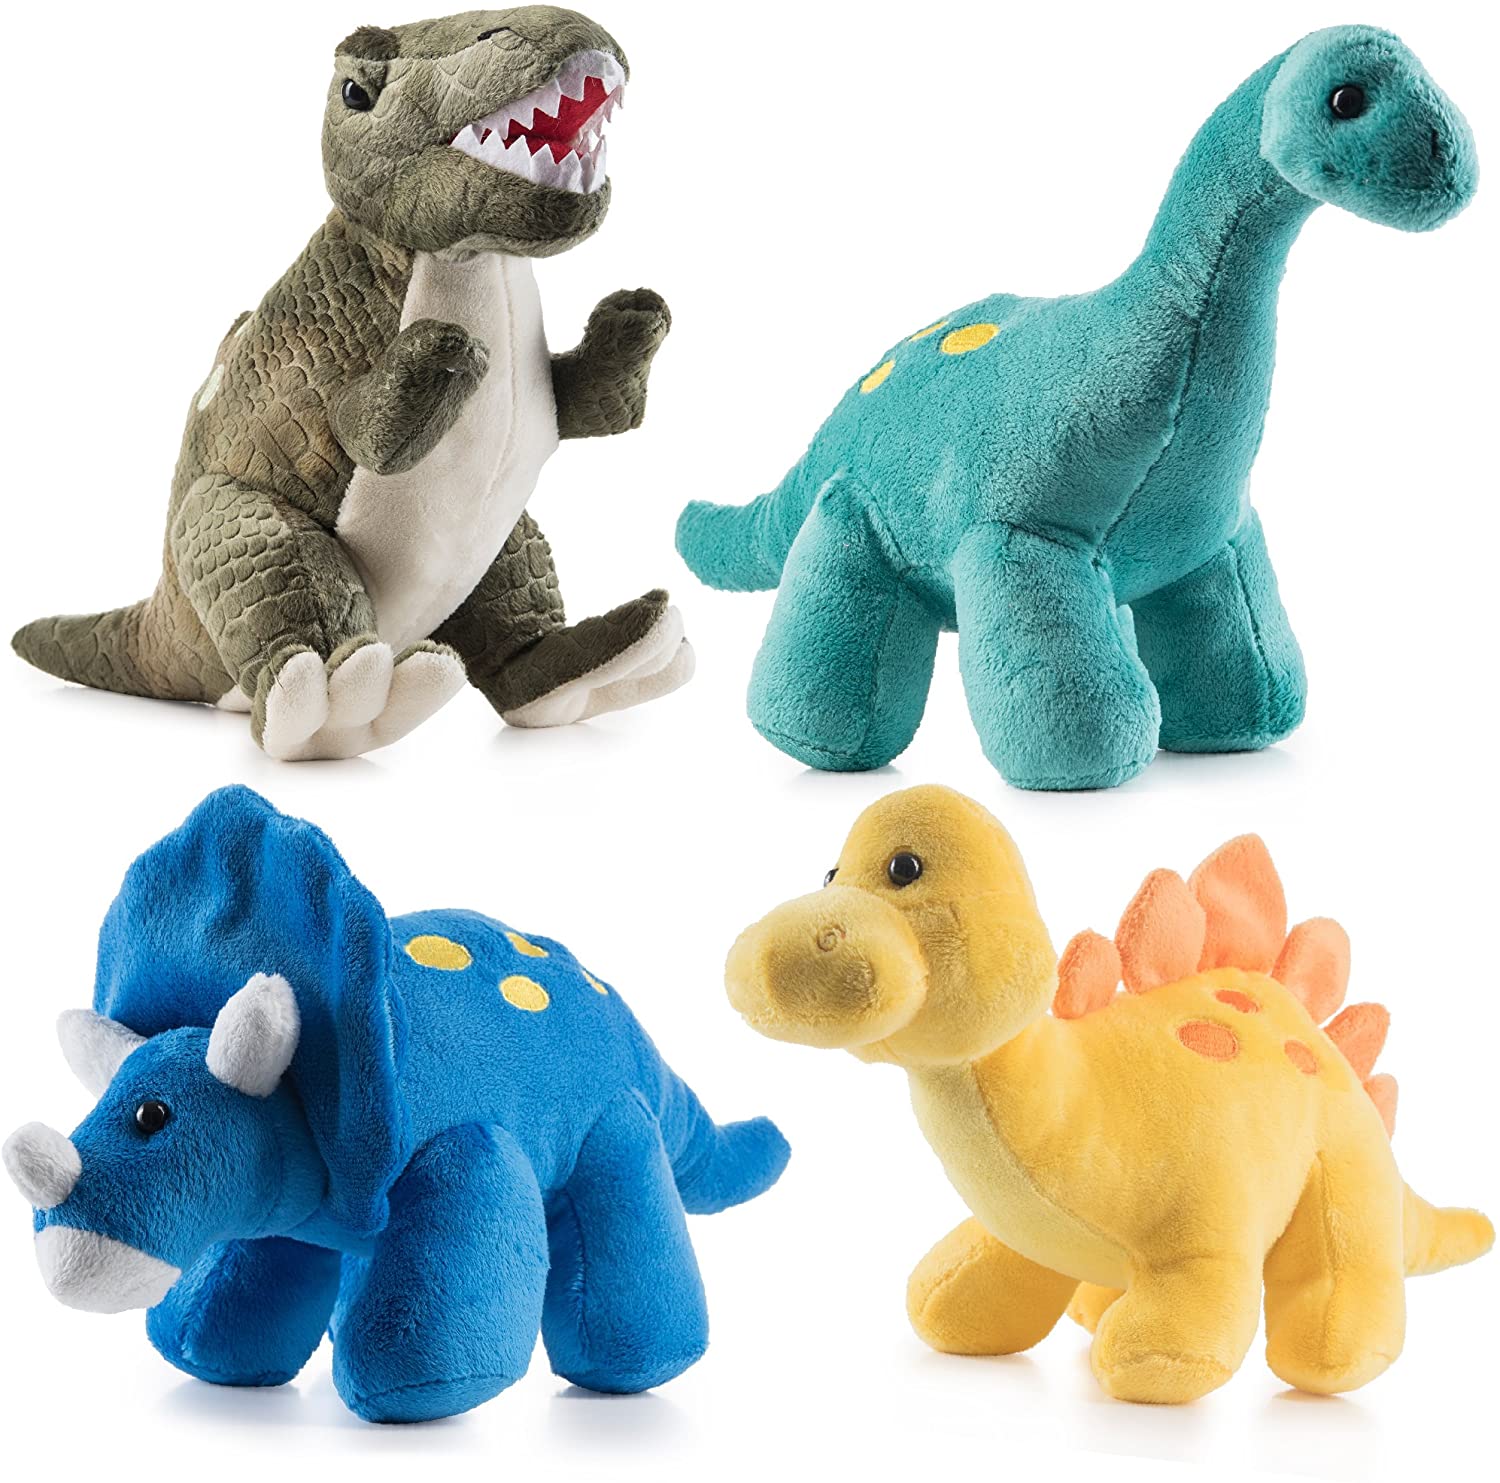 Prextex Plush Dinosaurs - 4 Pack of 10'' Long Stuffed Animal Assortment - Great Gift for Kids - Great Christmas Gift Set - image 1 of 7